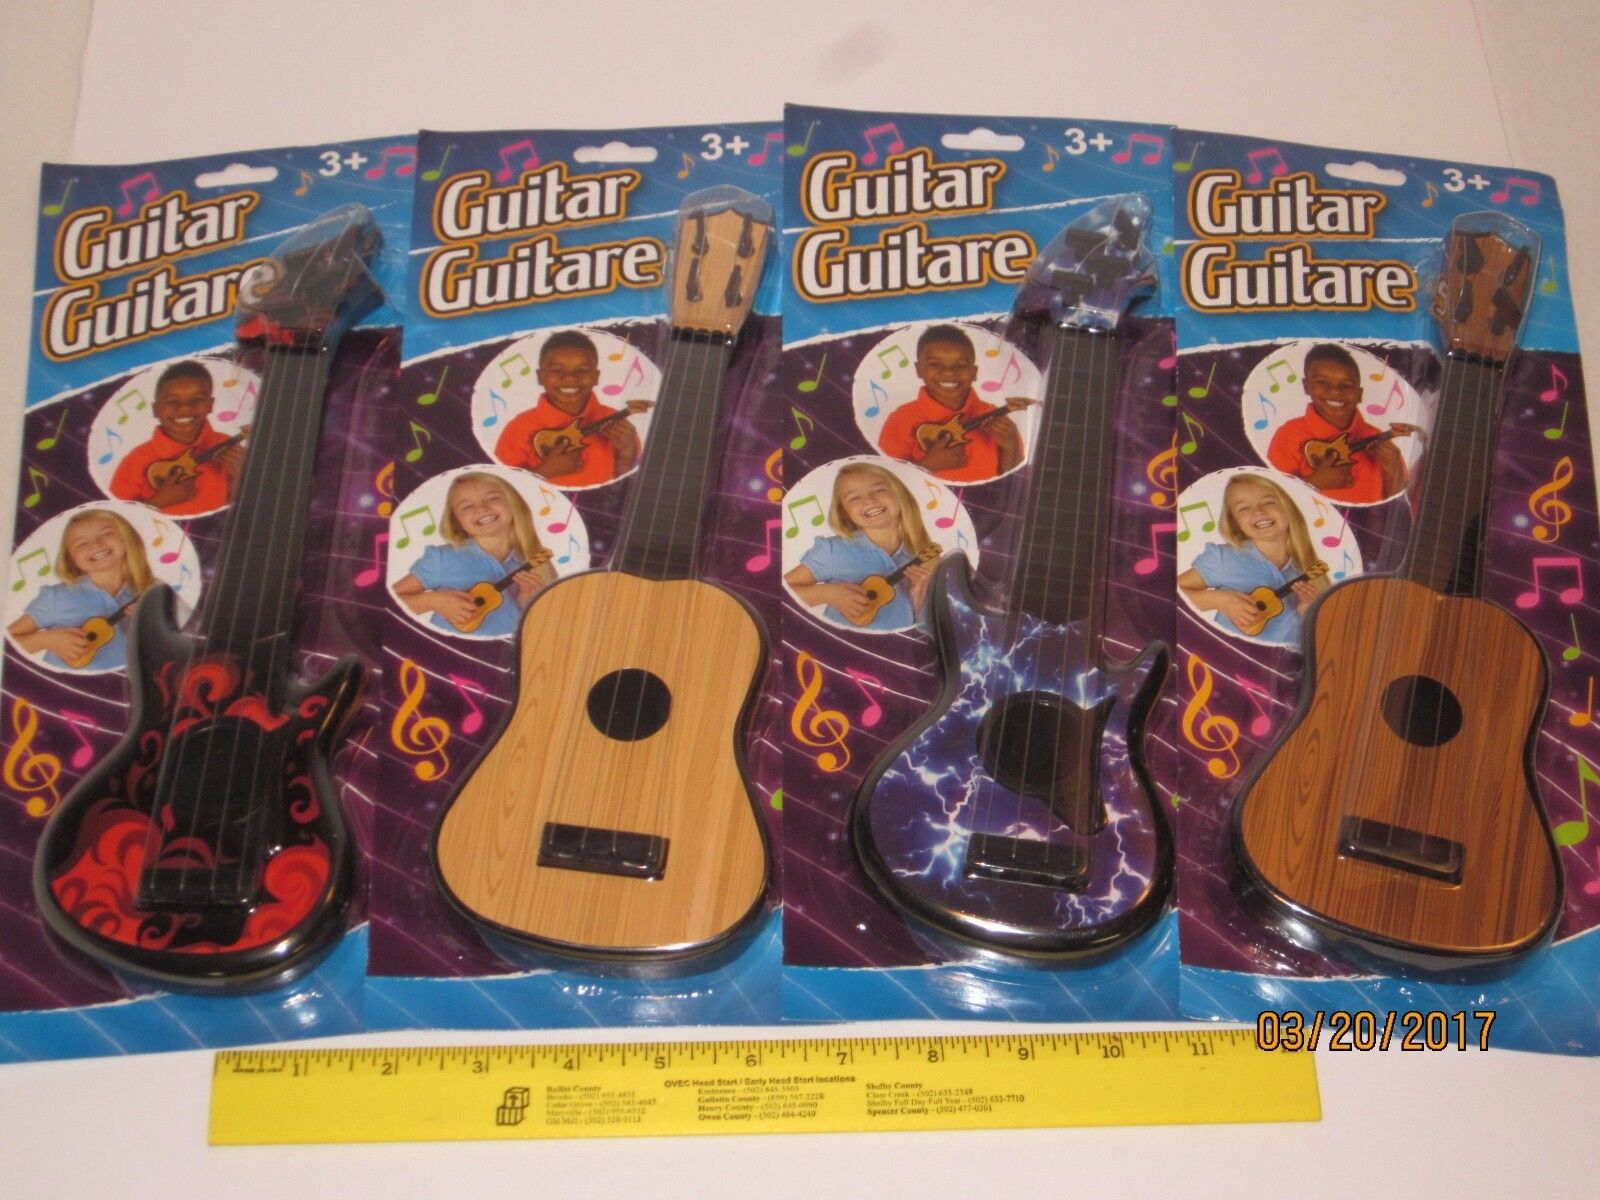 Toy Guitar 11" W/4 Strings - Pretend Play, Toddlers, Music, Acoustic, Electric